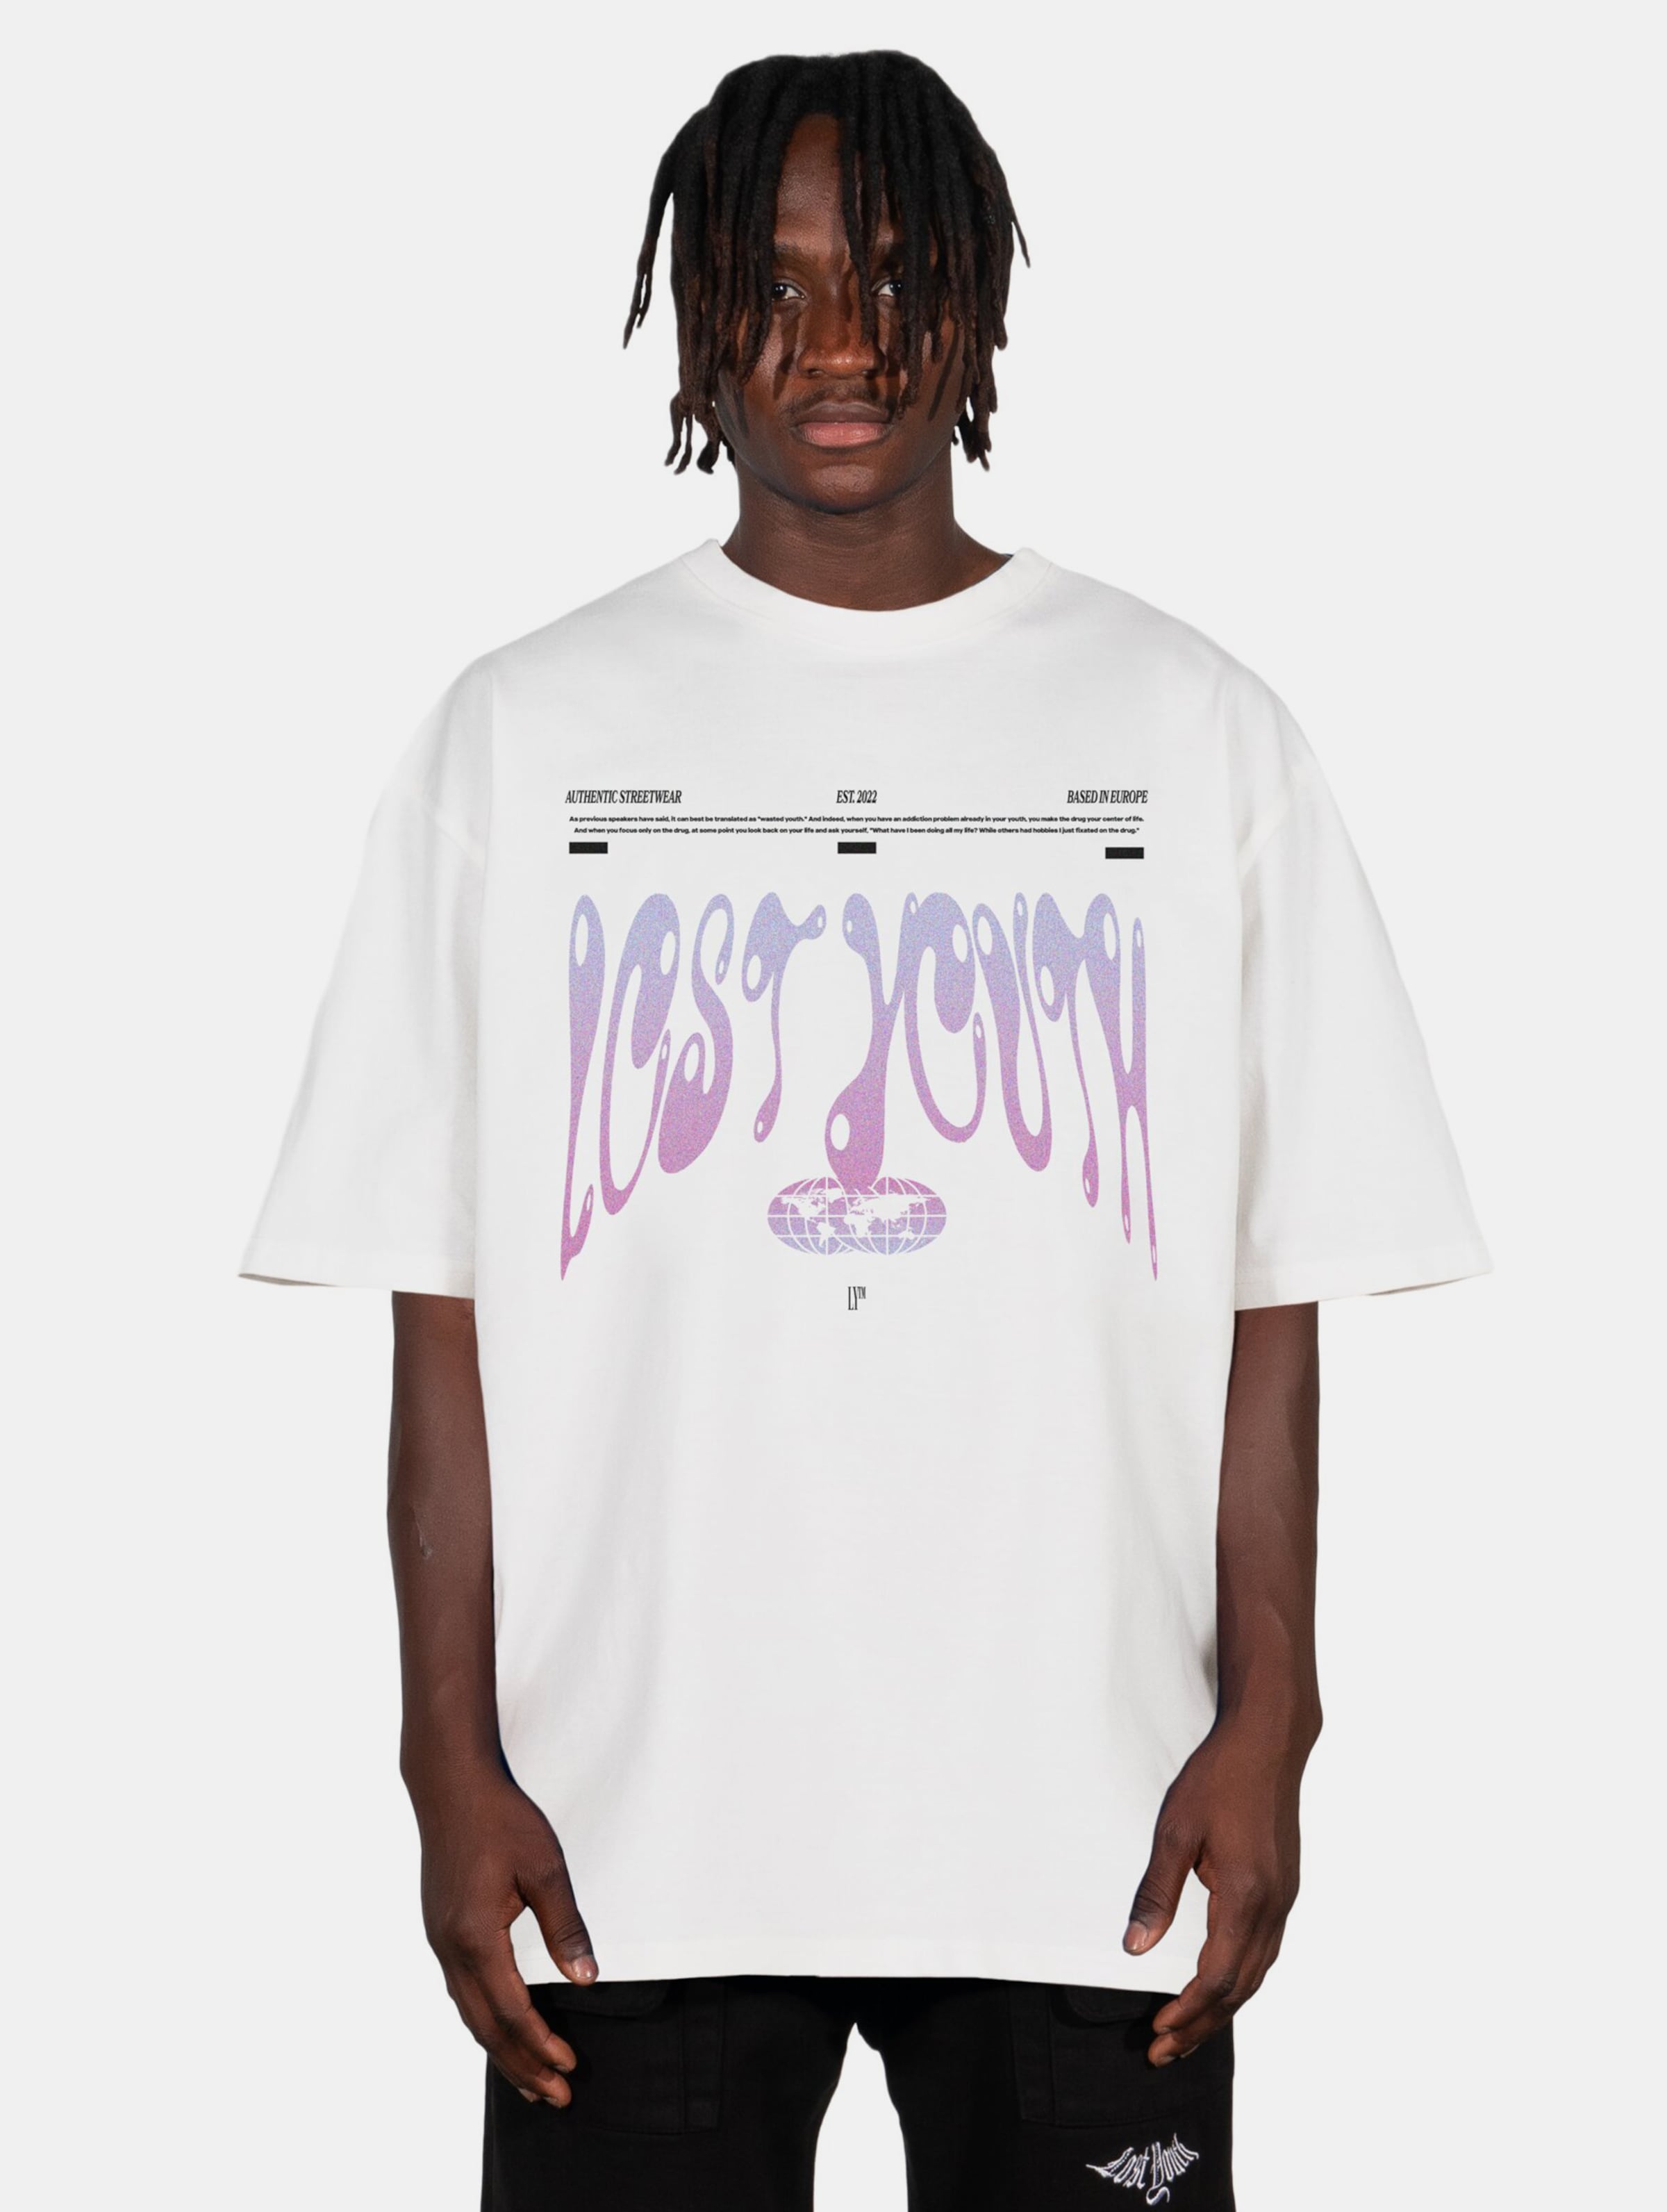 Lost Youth LY TEE- AUTHENTIC Männer,Unisex op kleur wit, Maat M